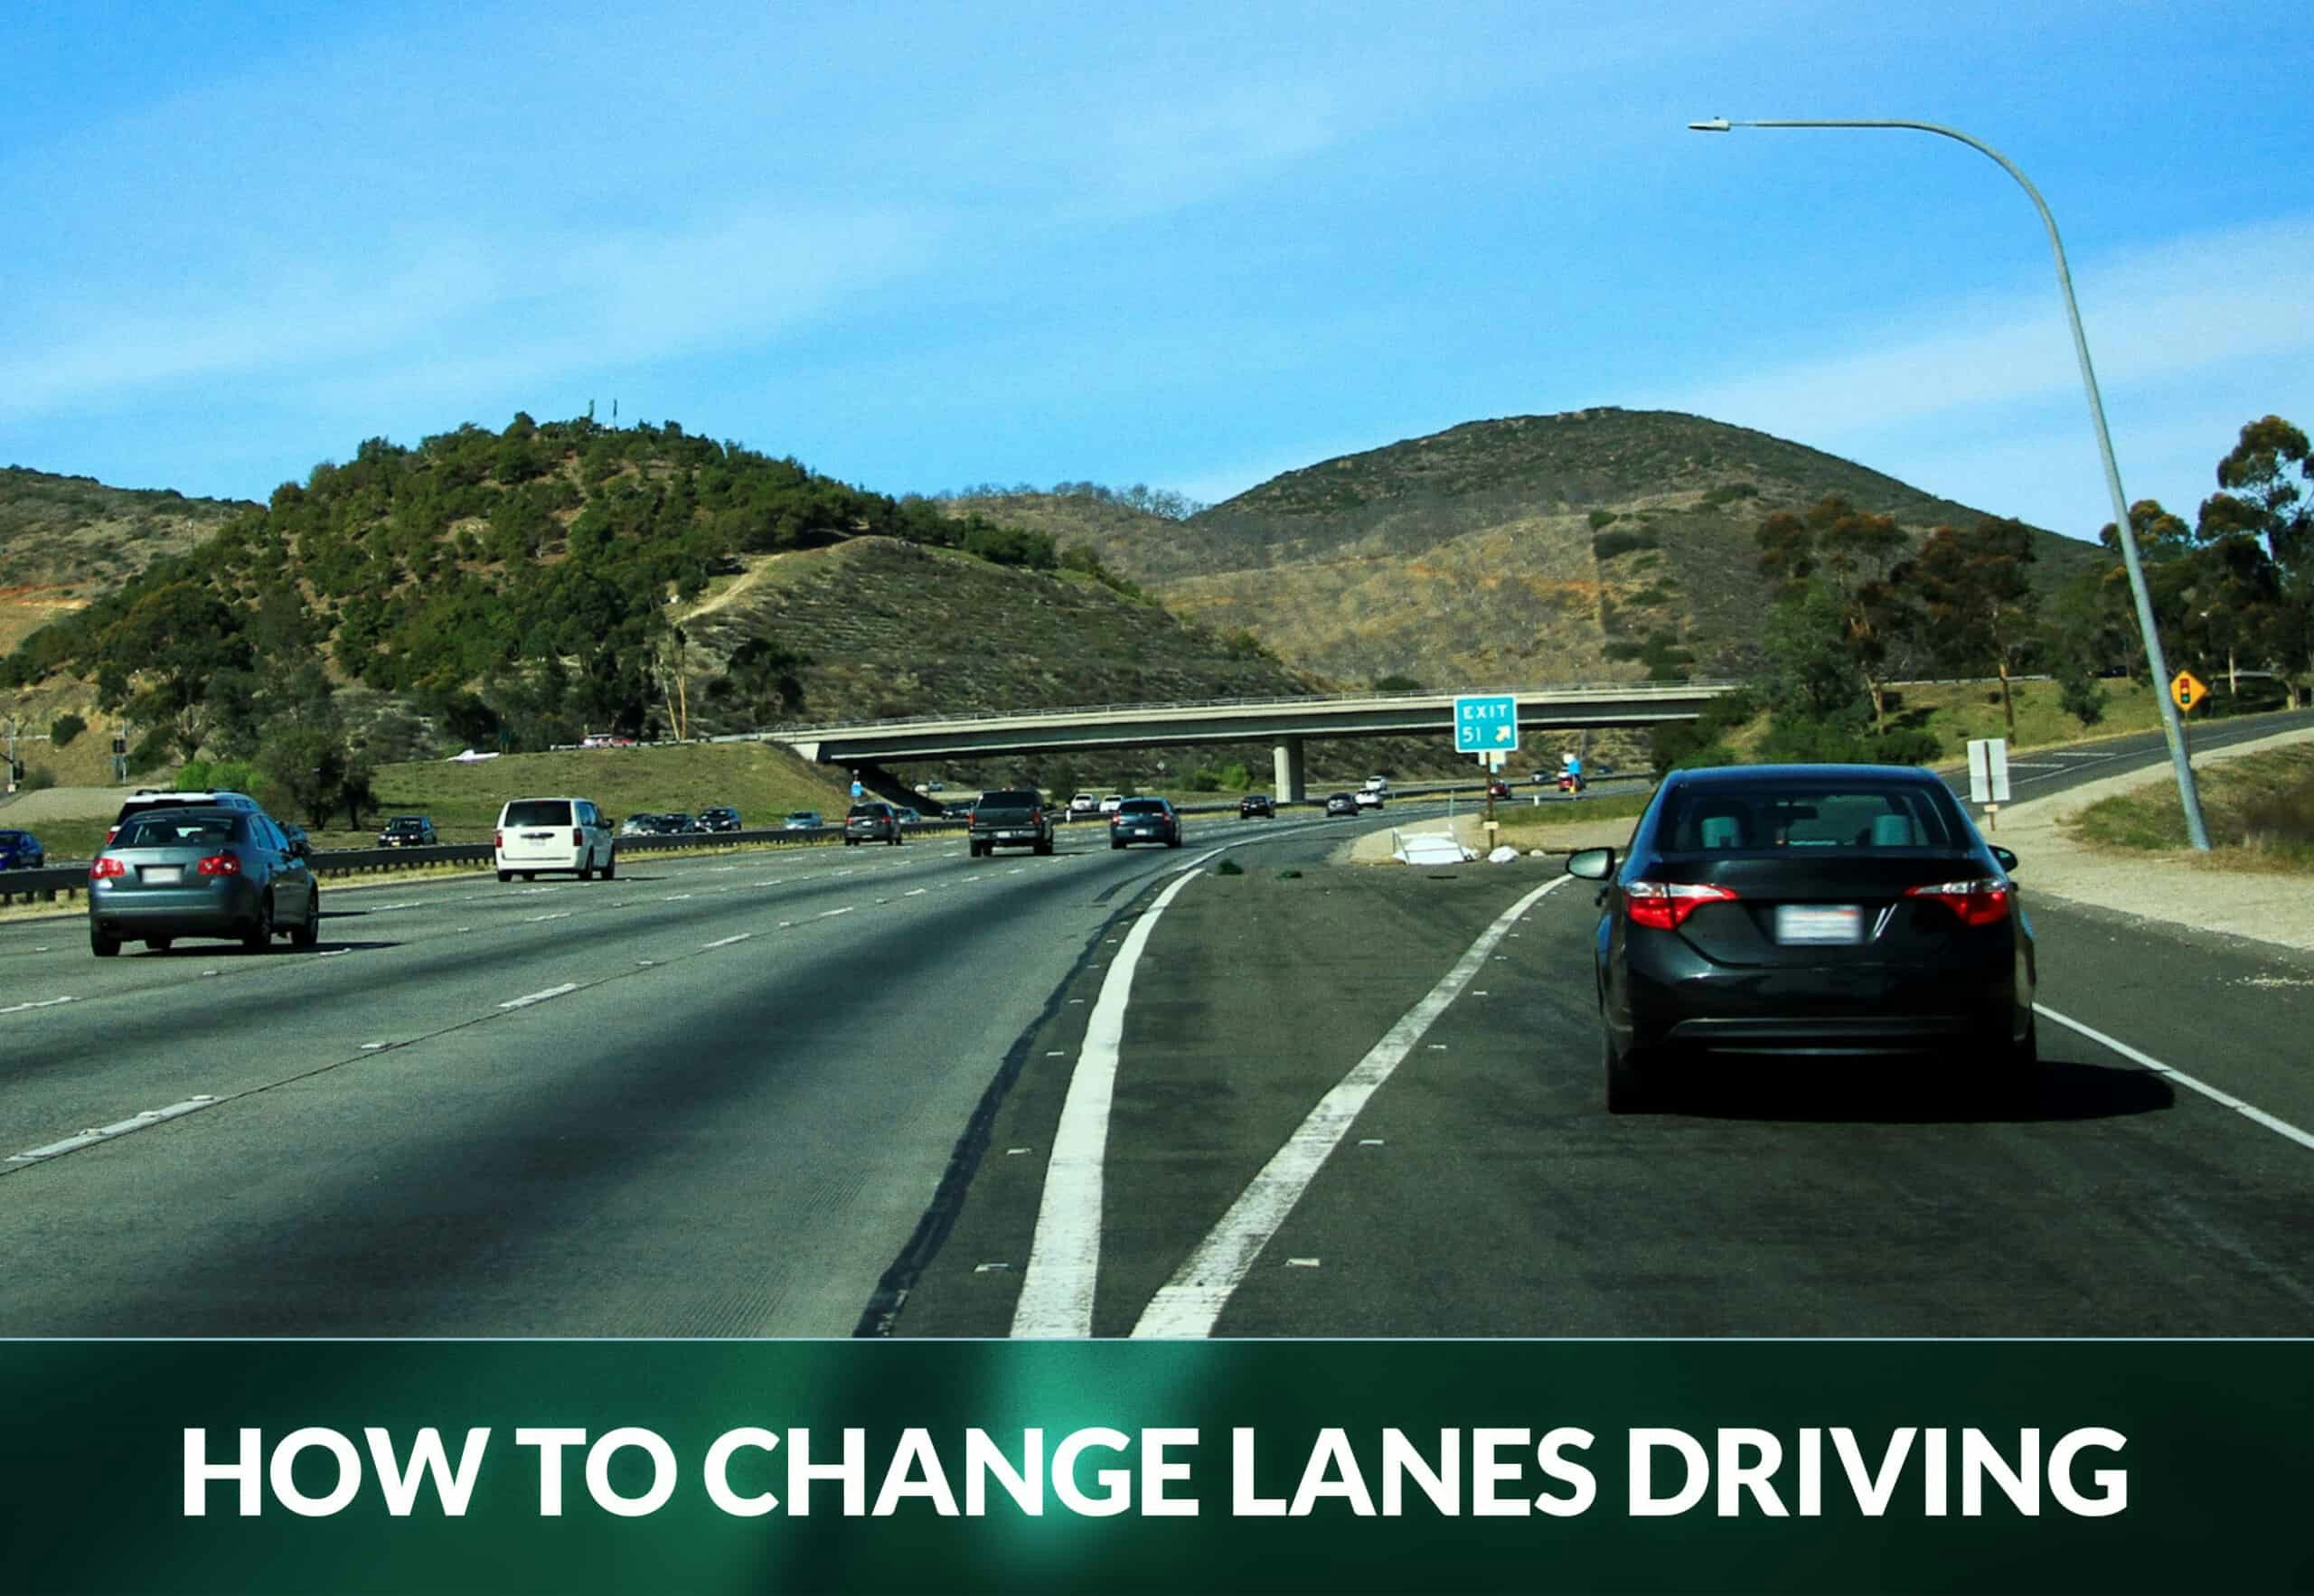 HOW TO CHANGE LANES DRIVING